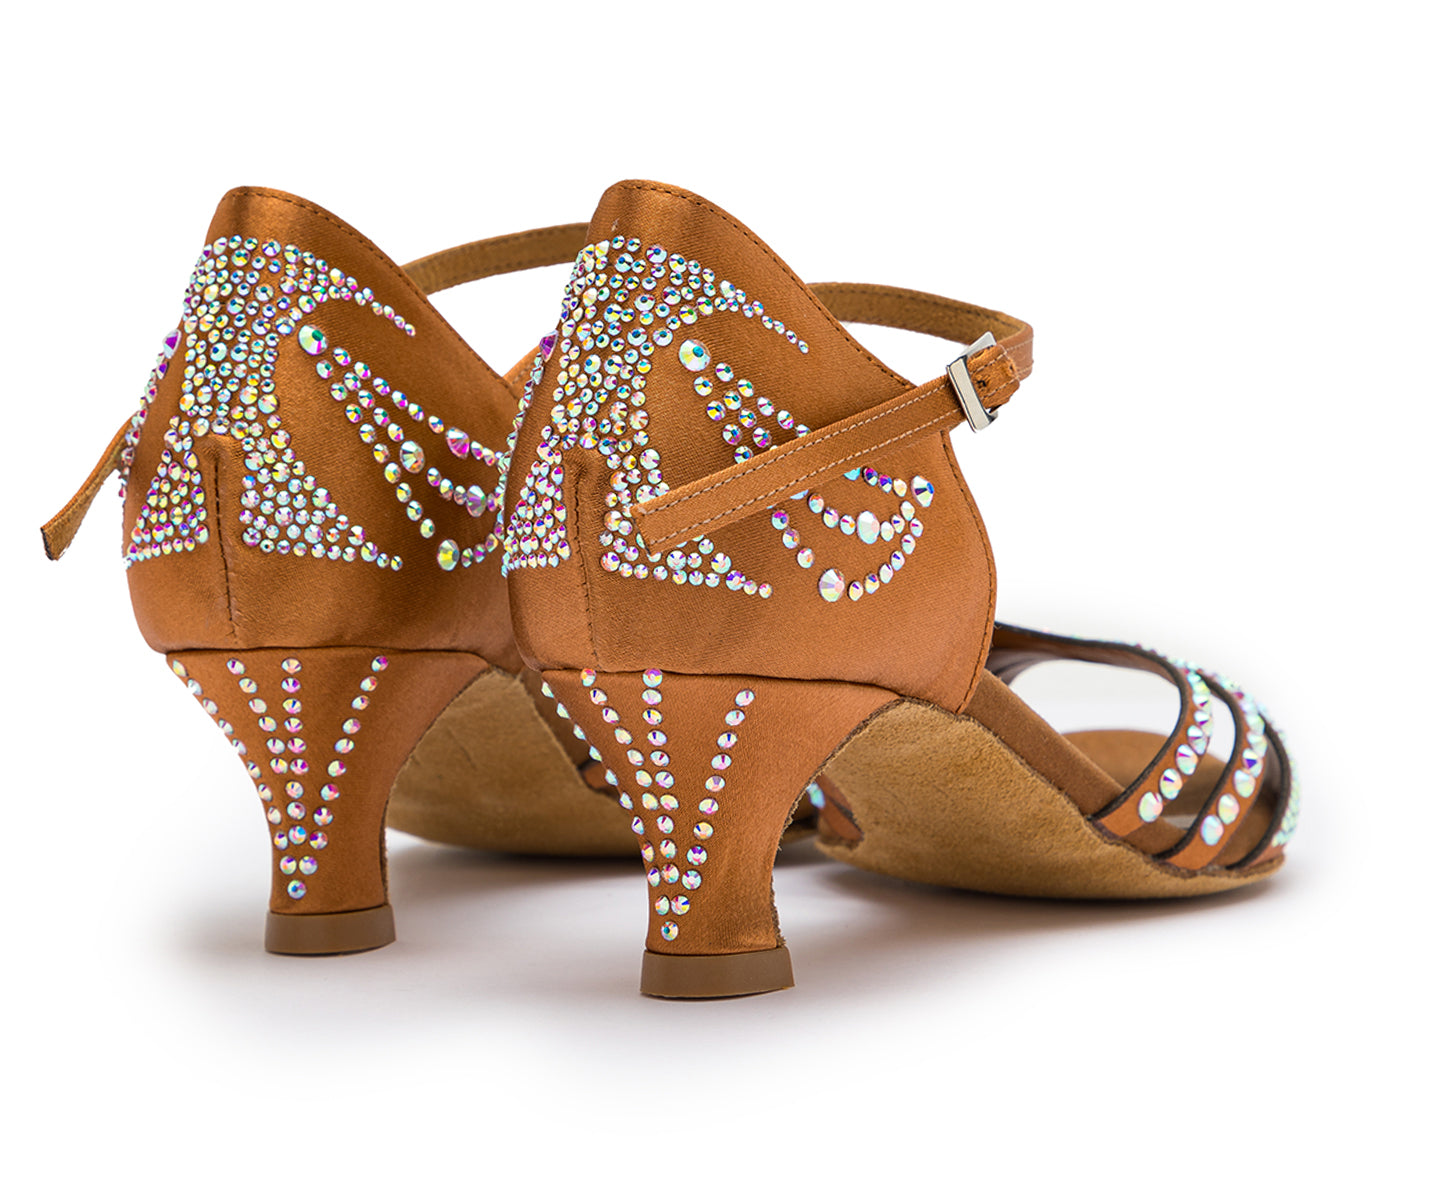 DQ L3m dance shoes in Tan with rhinestones